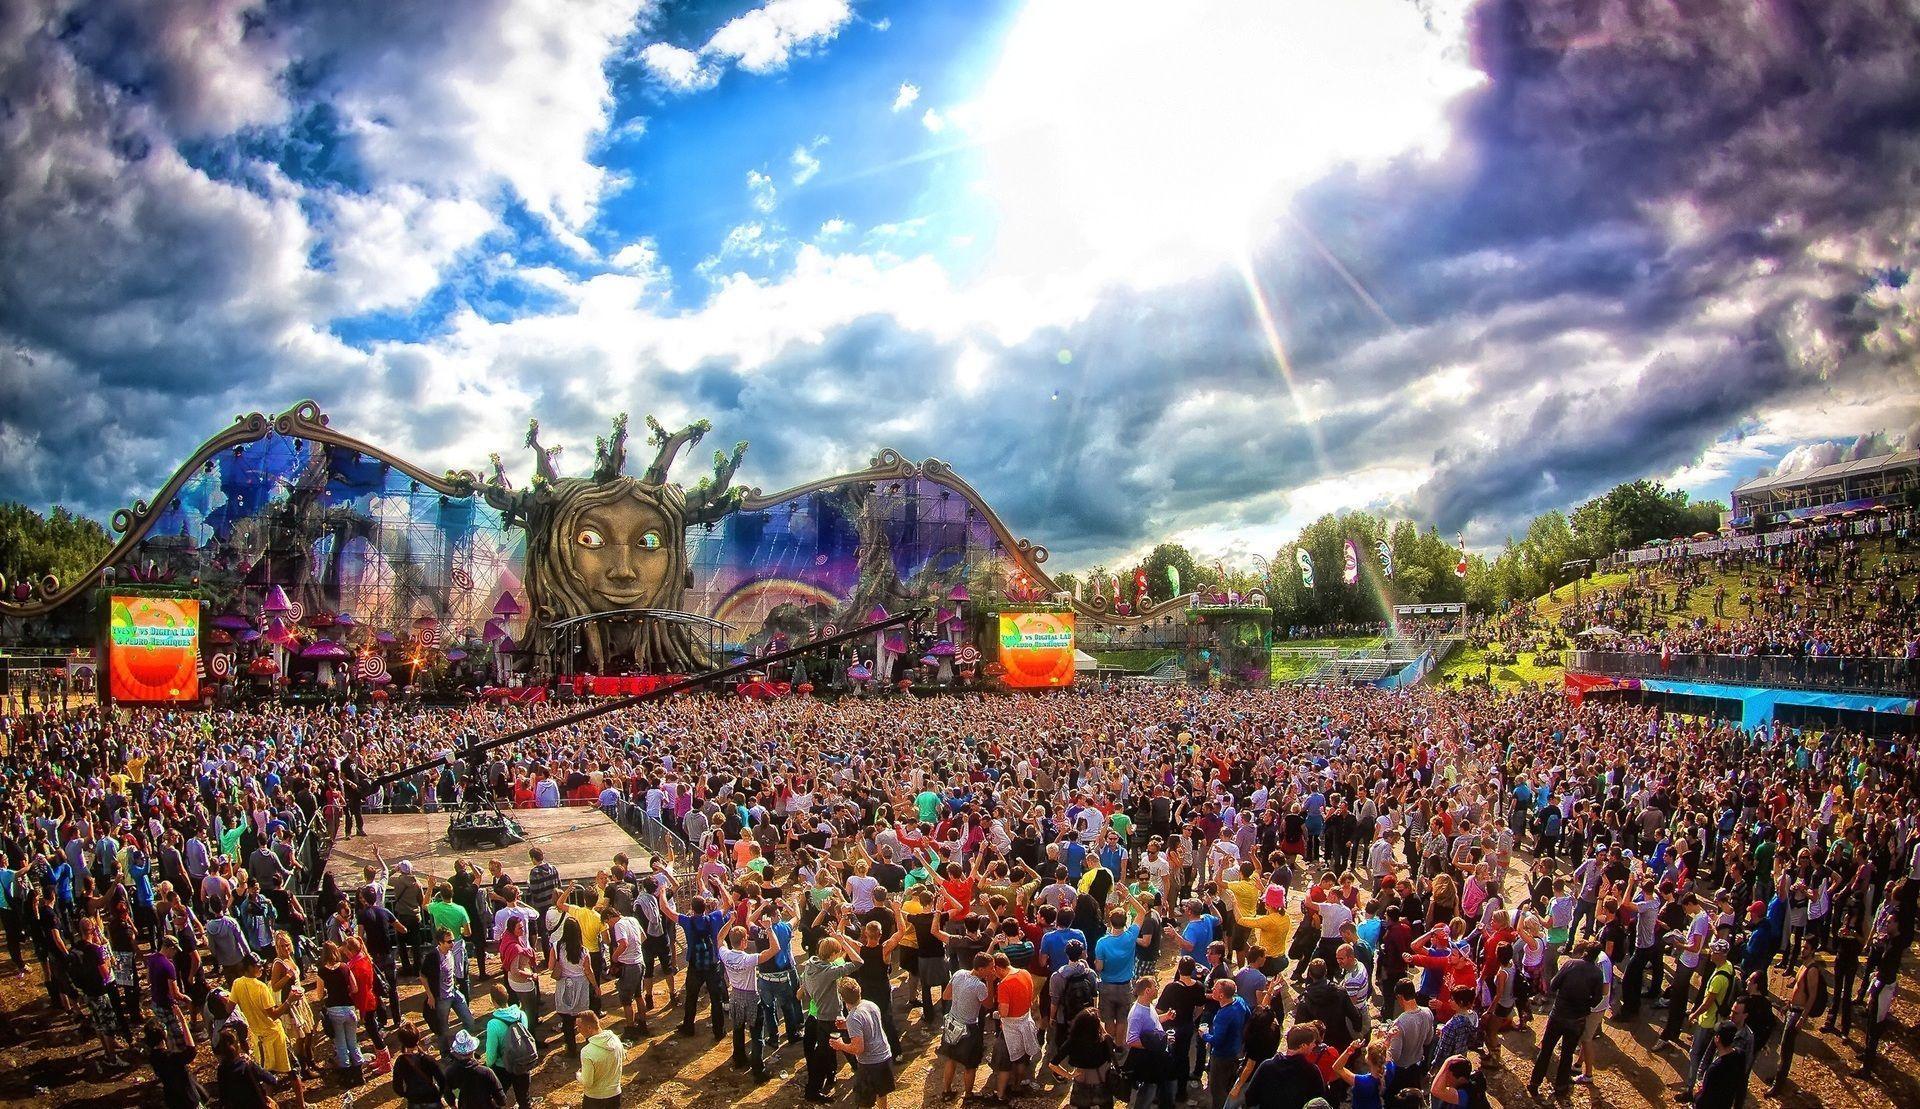 (Overplayed) Tracks You&;re Bound To Hear At Tomorrowland 2014